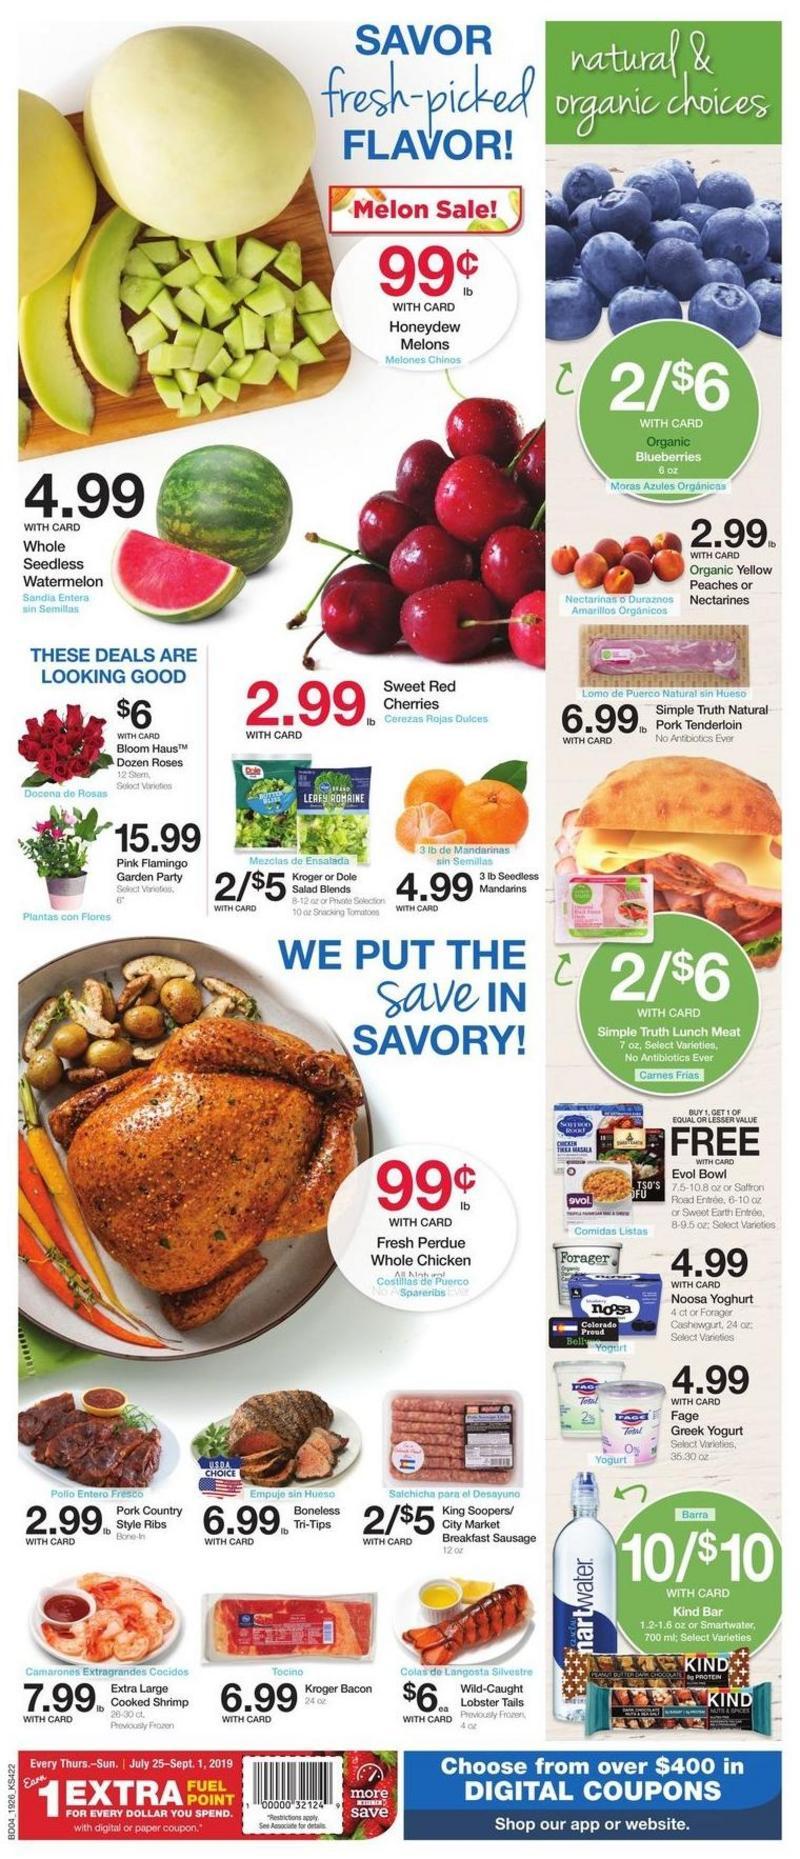 City Market Weekly Ad from July 31